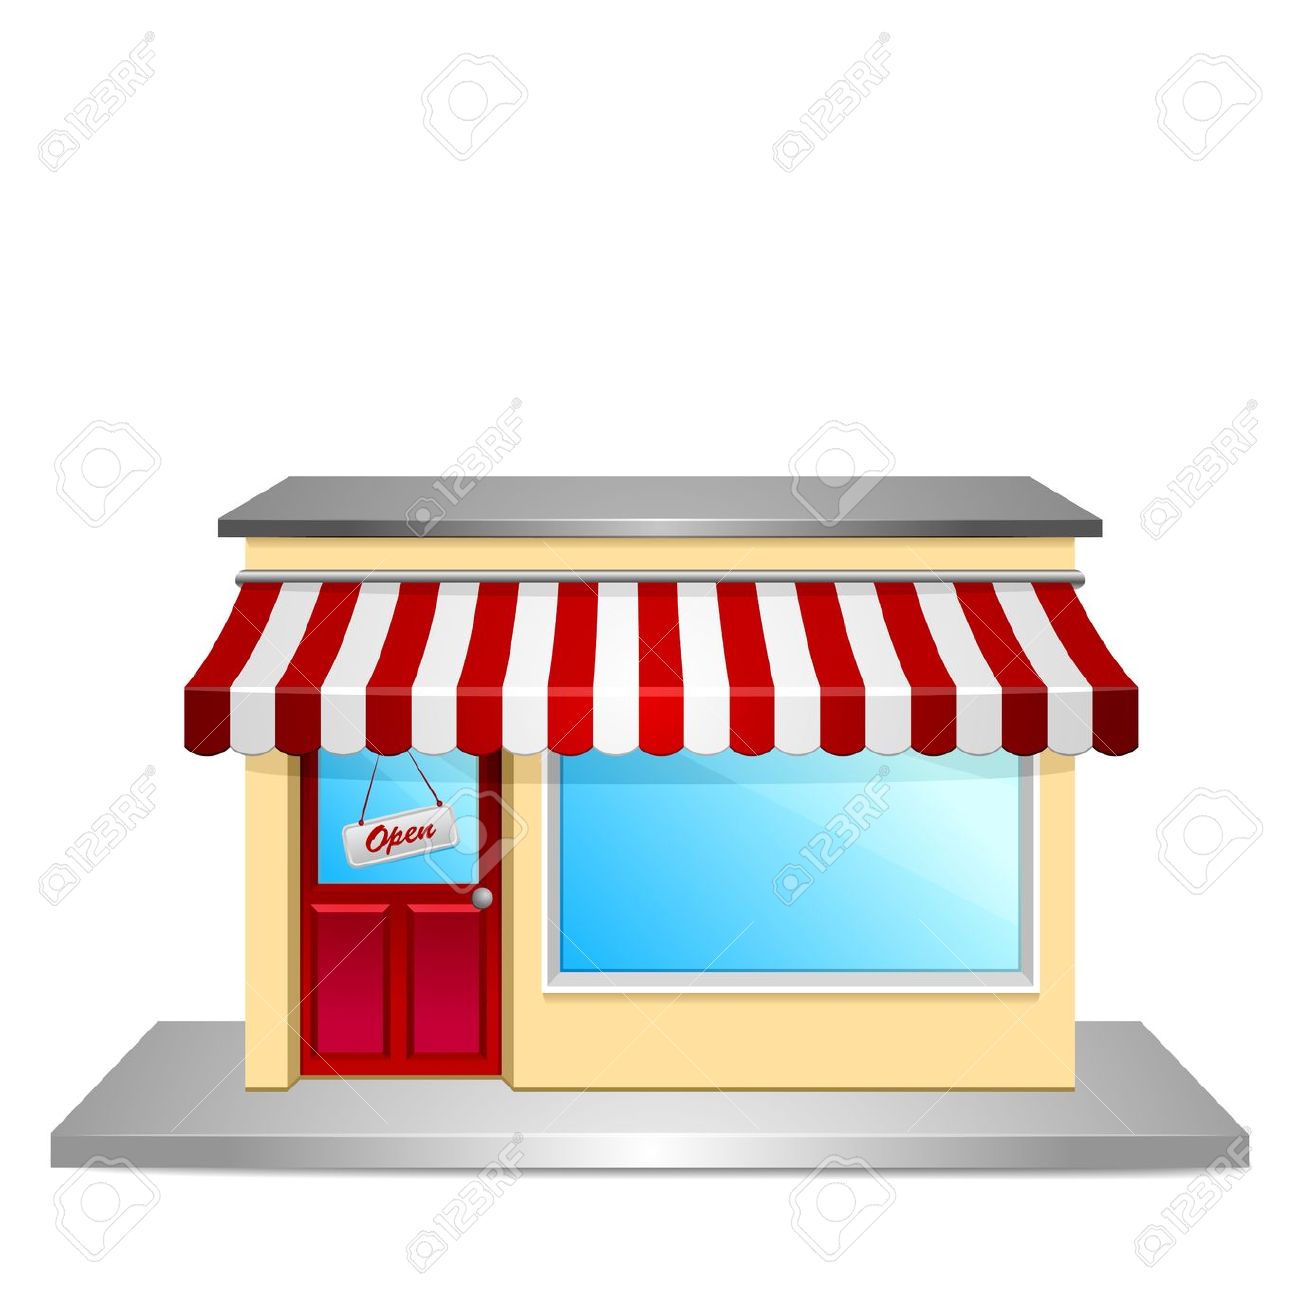 Storefront clipart clipartlook.